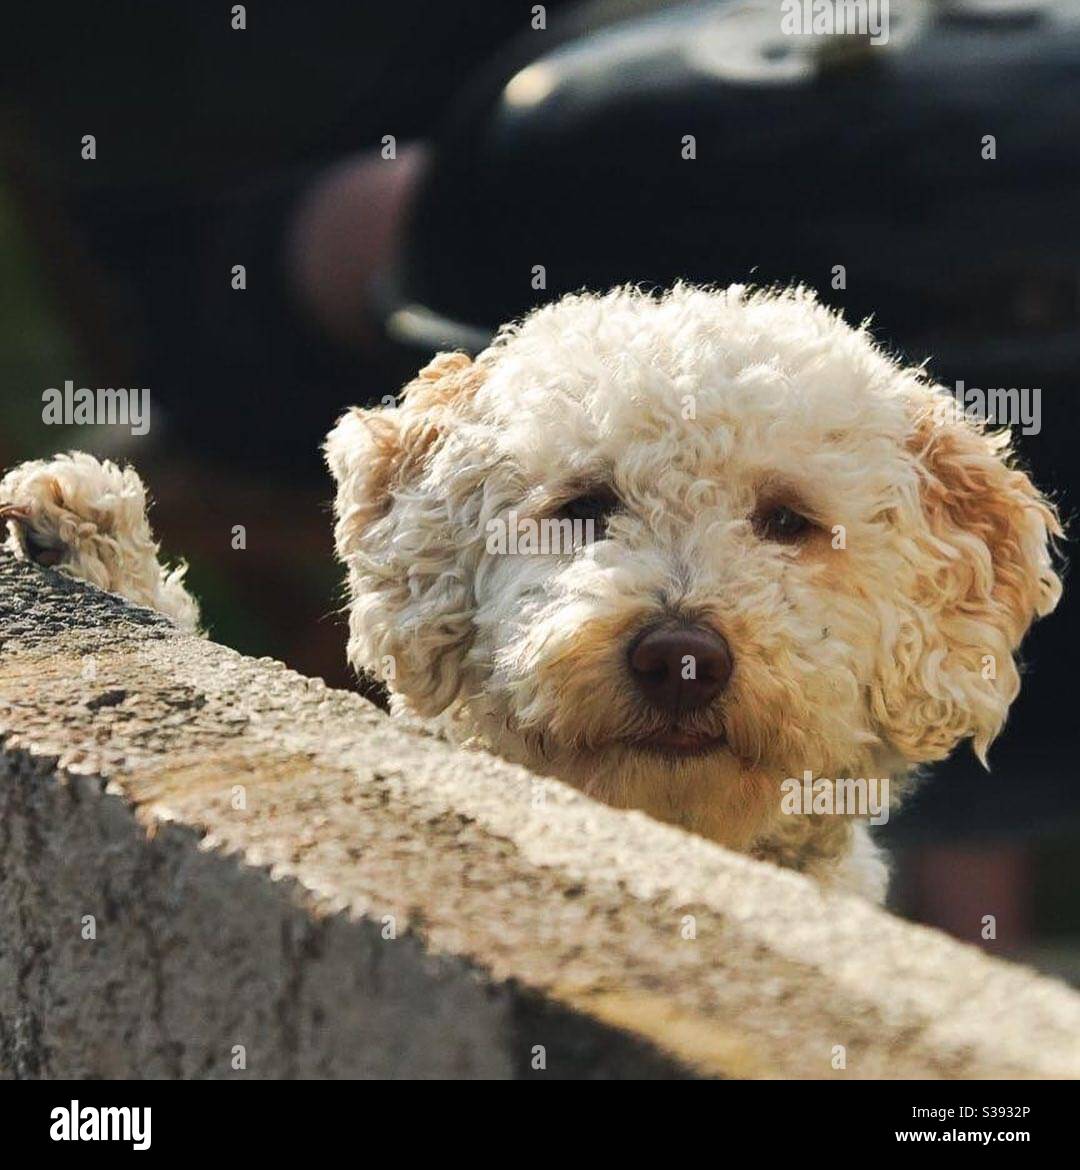 Cheeky dog looking over a wall! Stock Photo